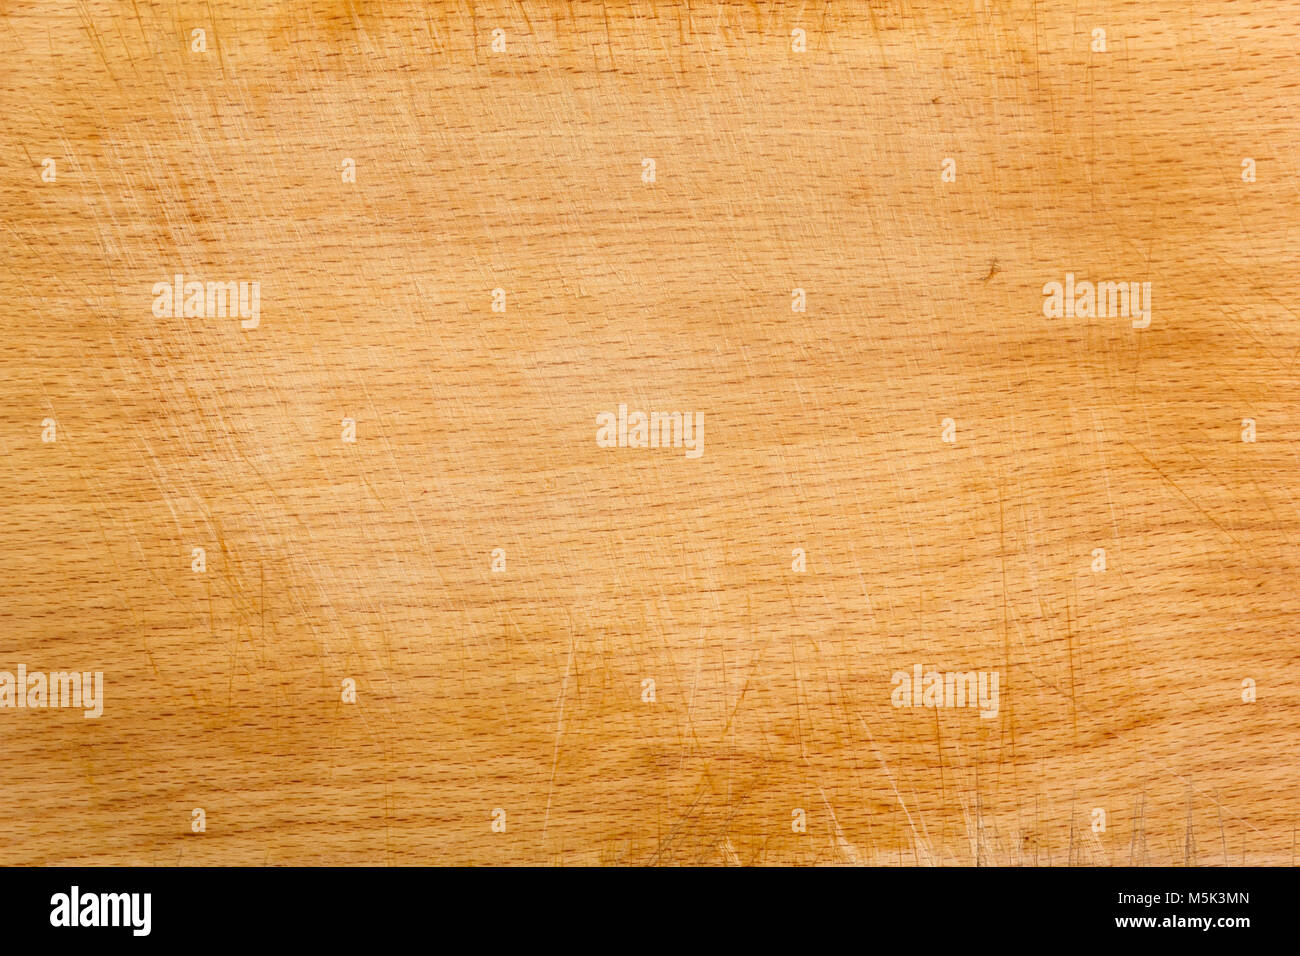 Old grooved wood texture Stock Photo